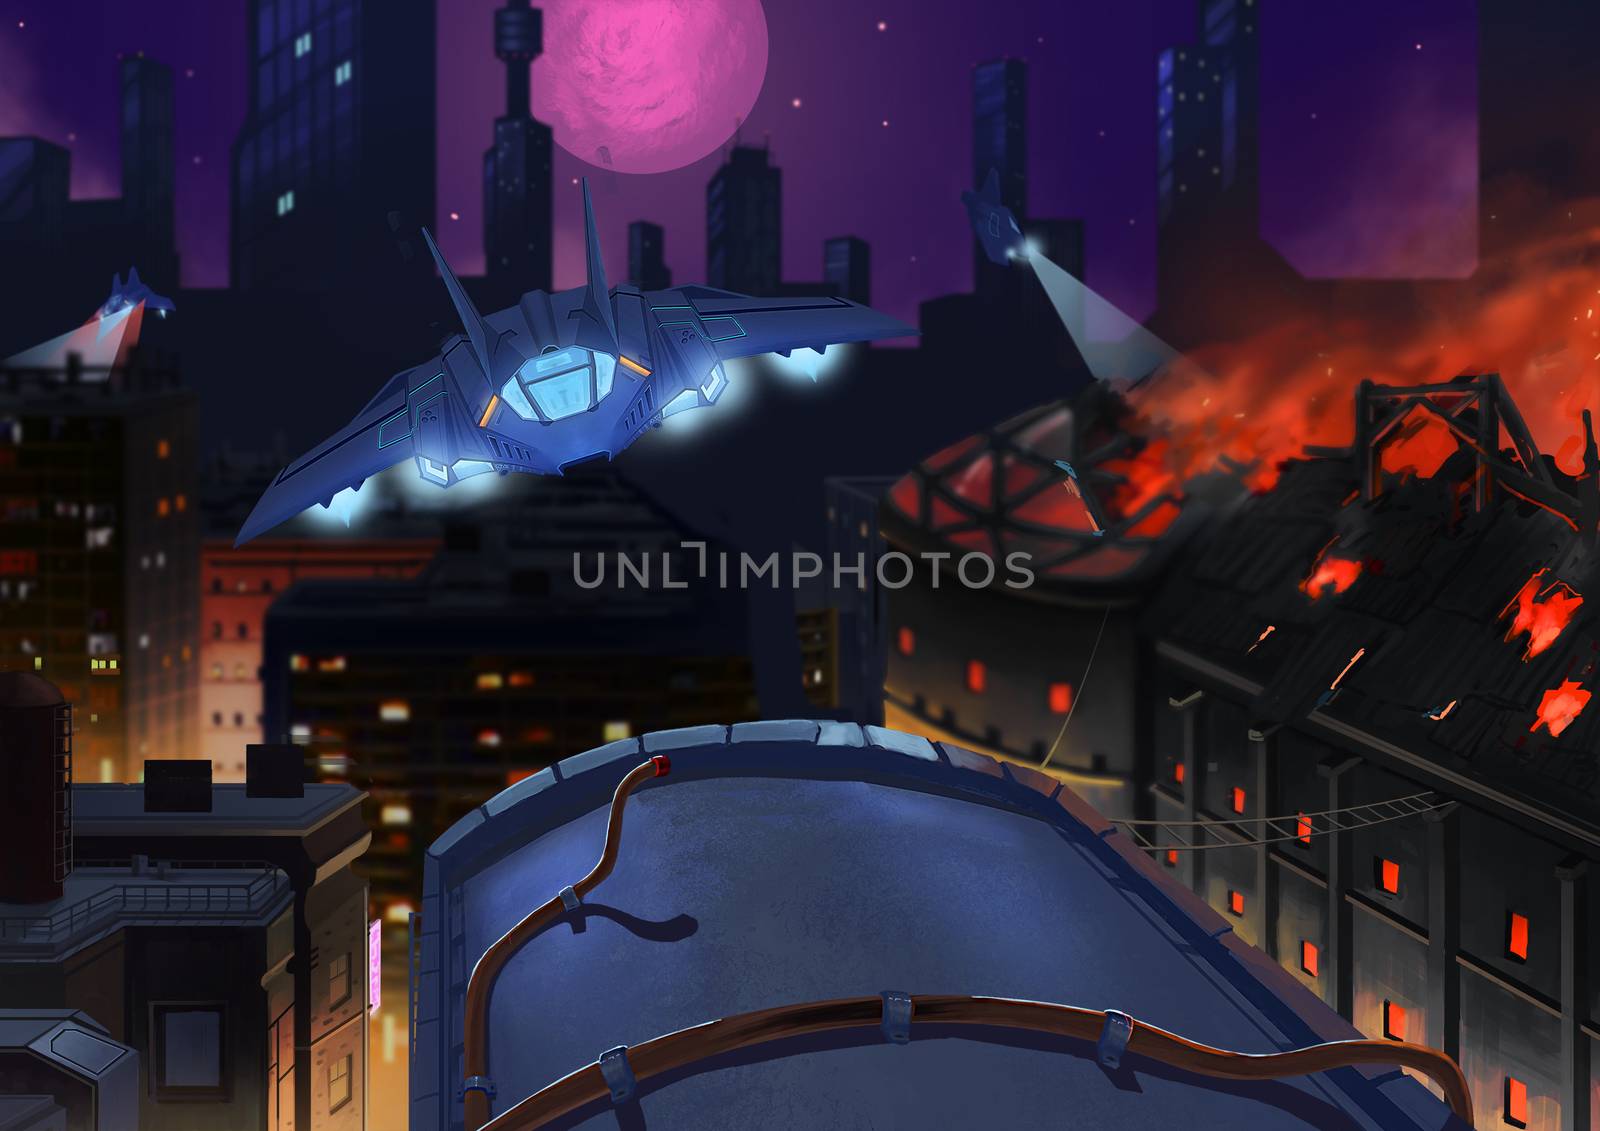 Illustration: The Occupied City On Fire. The Alien's Fighter Airplane goes out on Patrol and Search to Suppress the Rebel Forces. Story with Fantastic Cartoon Style Scene Wallpaper Background Design. by NextMars